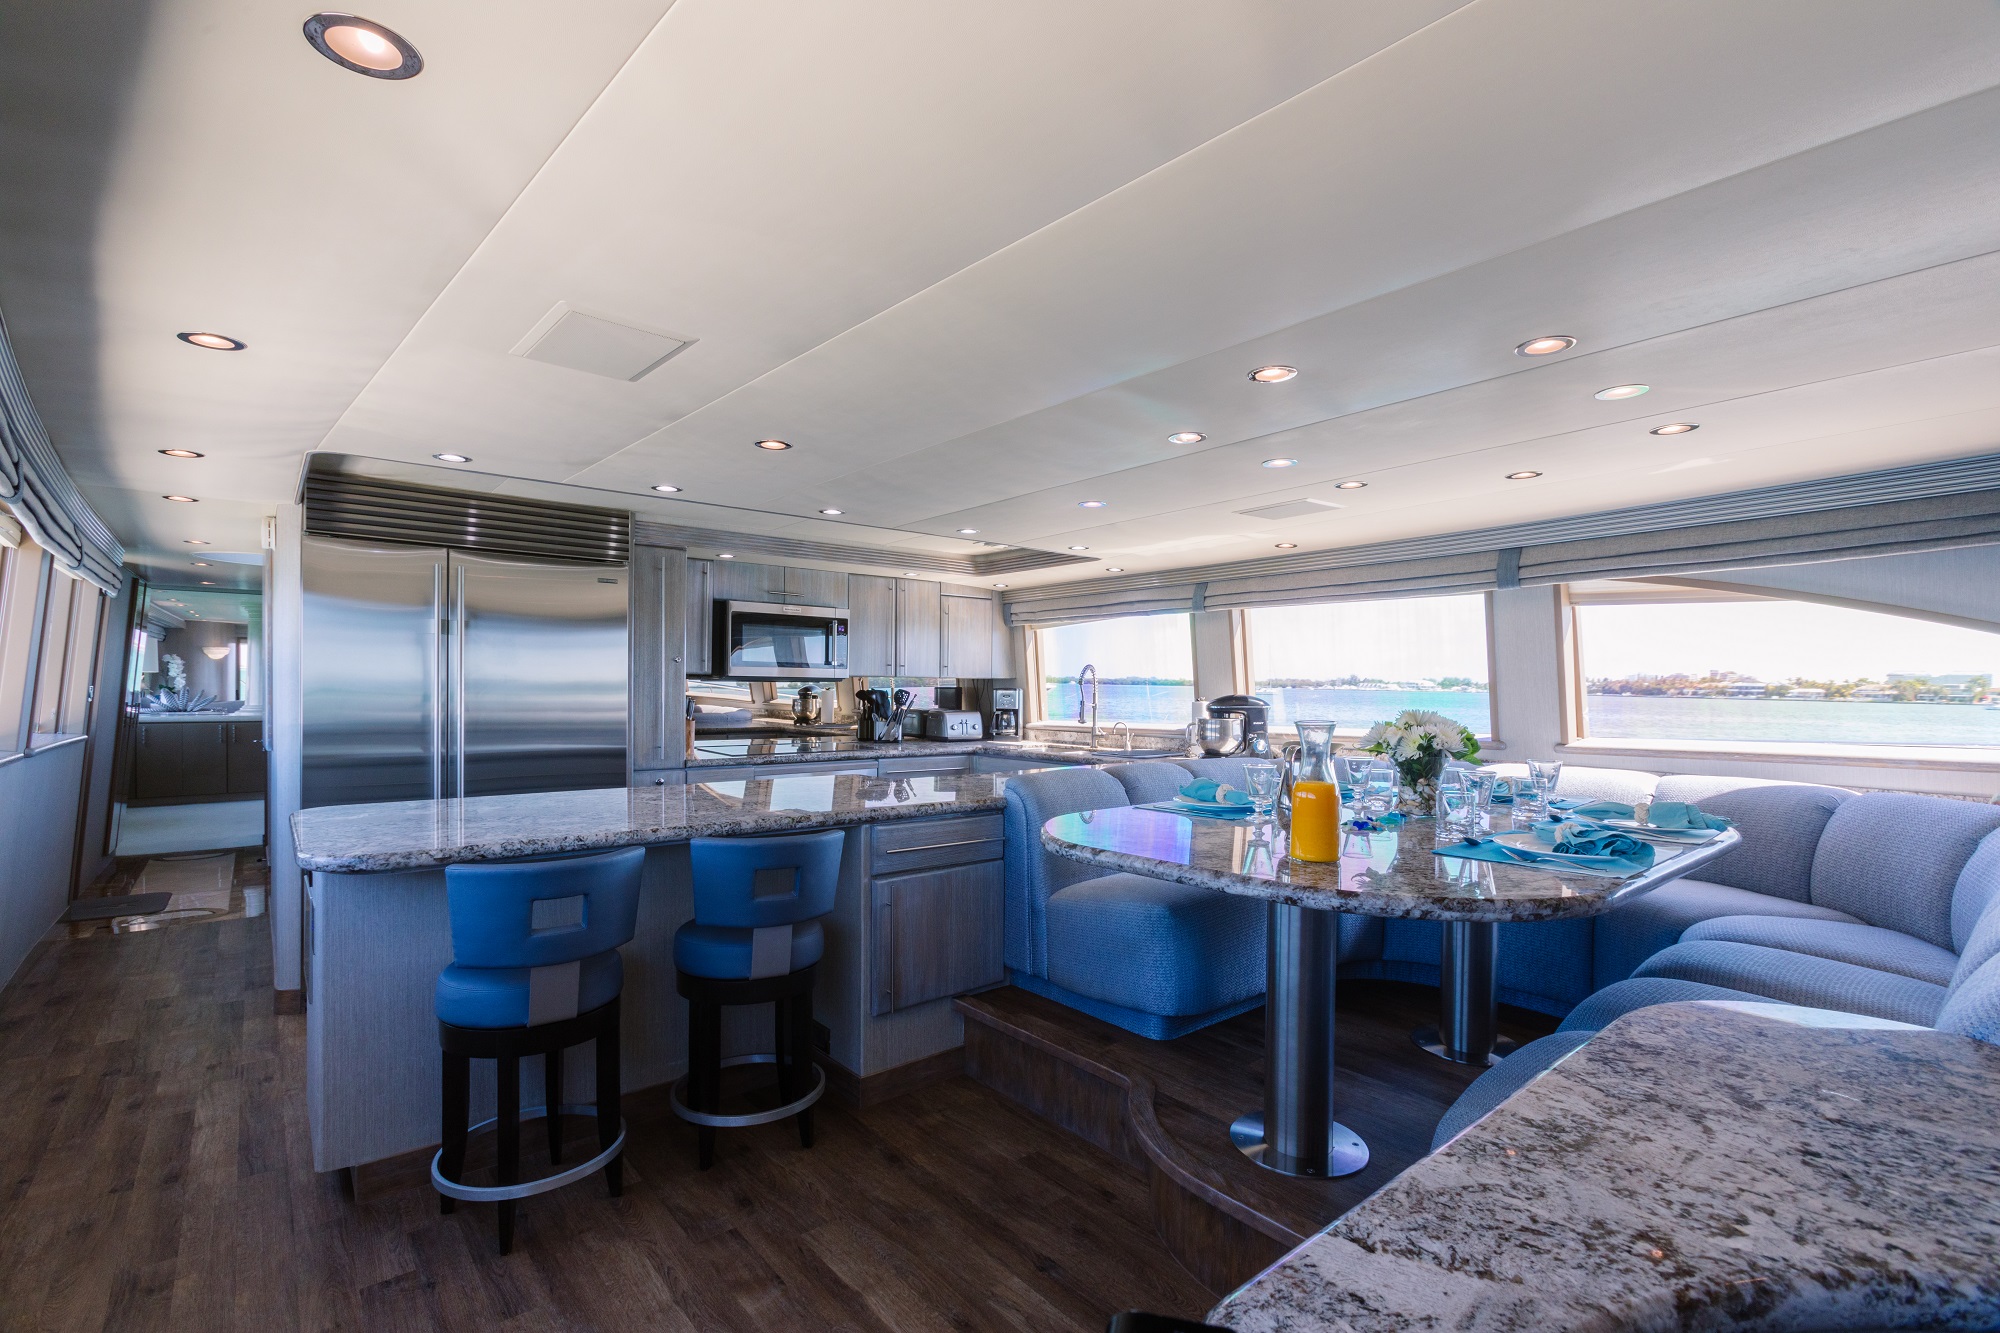 Dine in galley